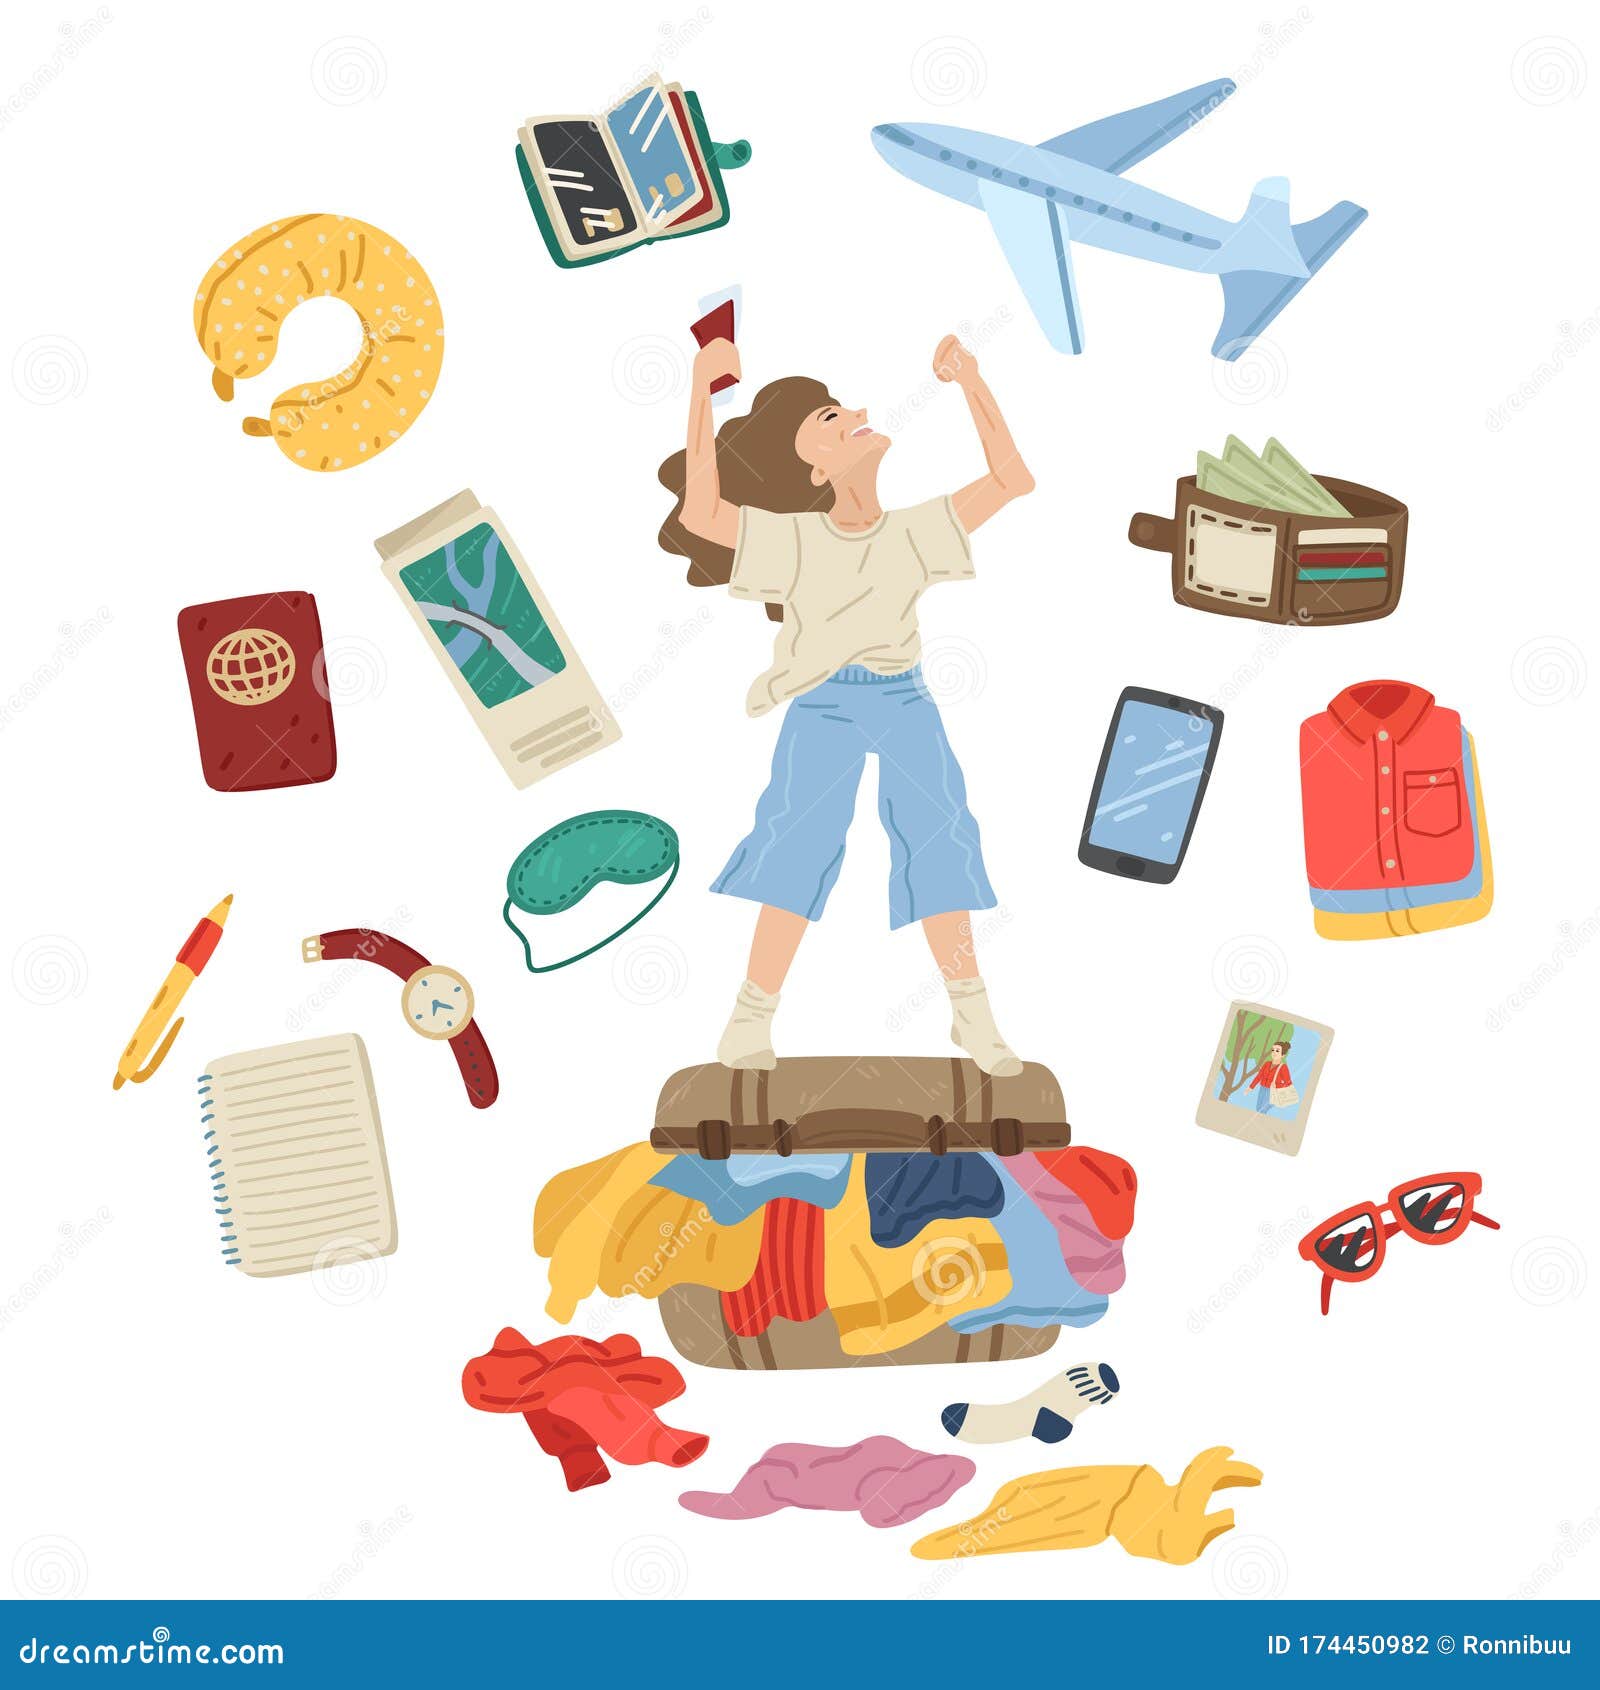 Packing Suitcase For Vacation. Set Of Travel Items, Vector Cartoon